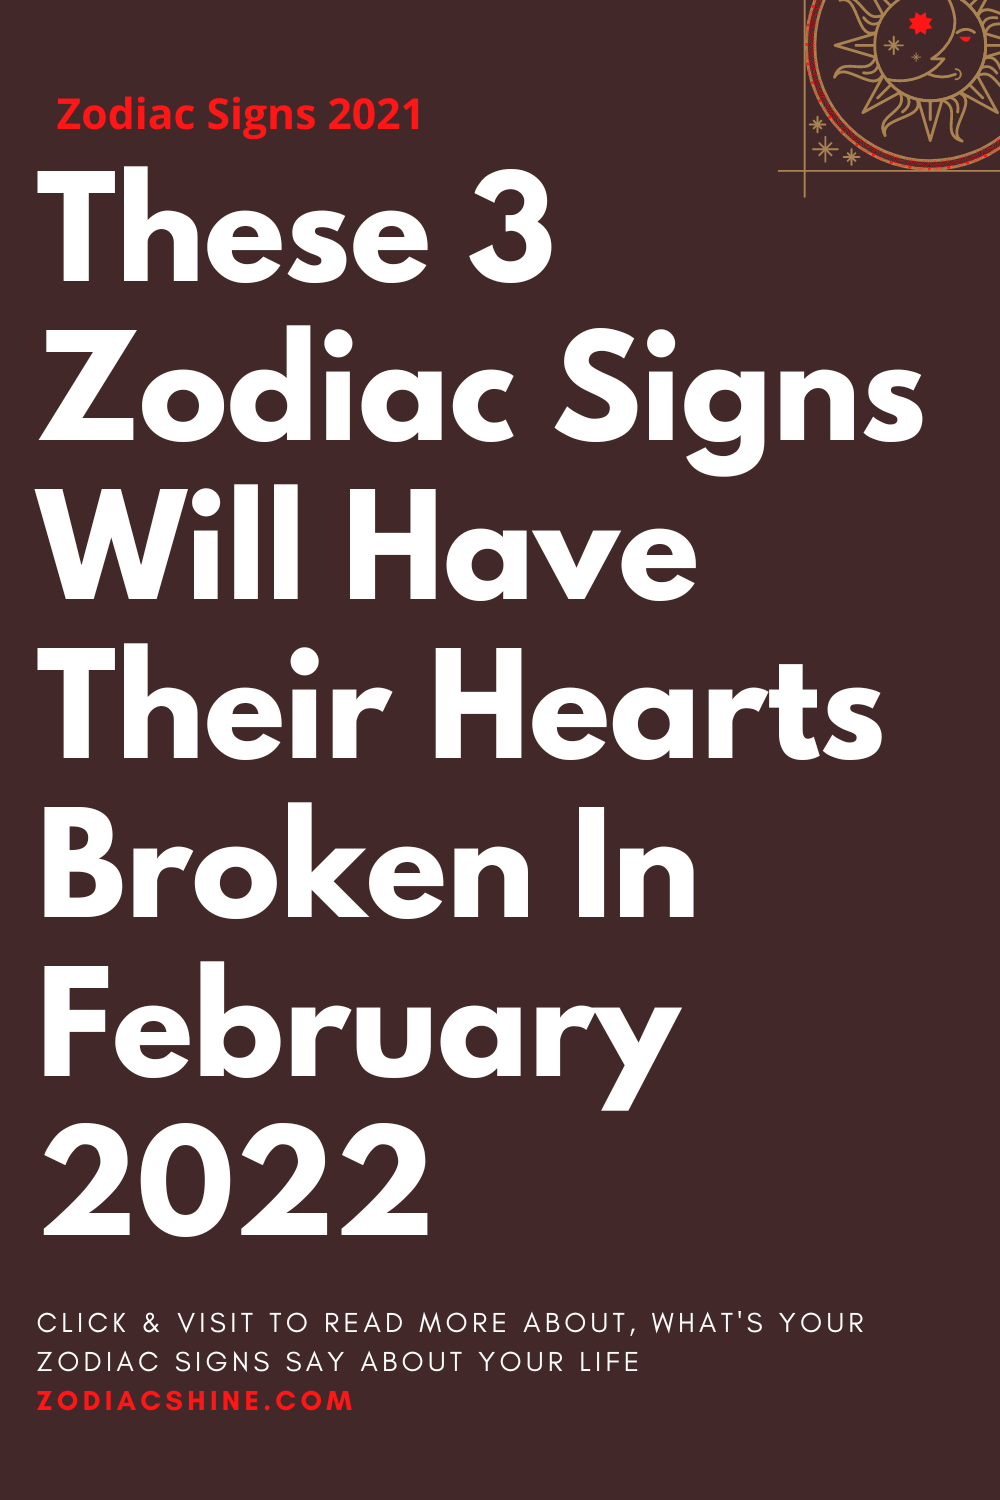 These 3 Zodiac Signs Will Have Their Hearts Broken In February 2022